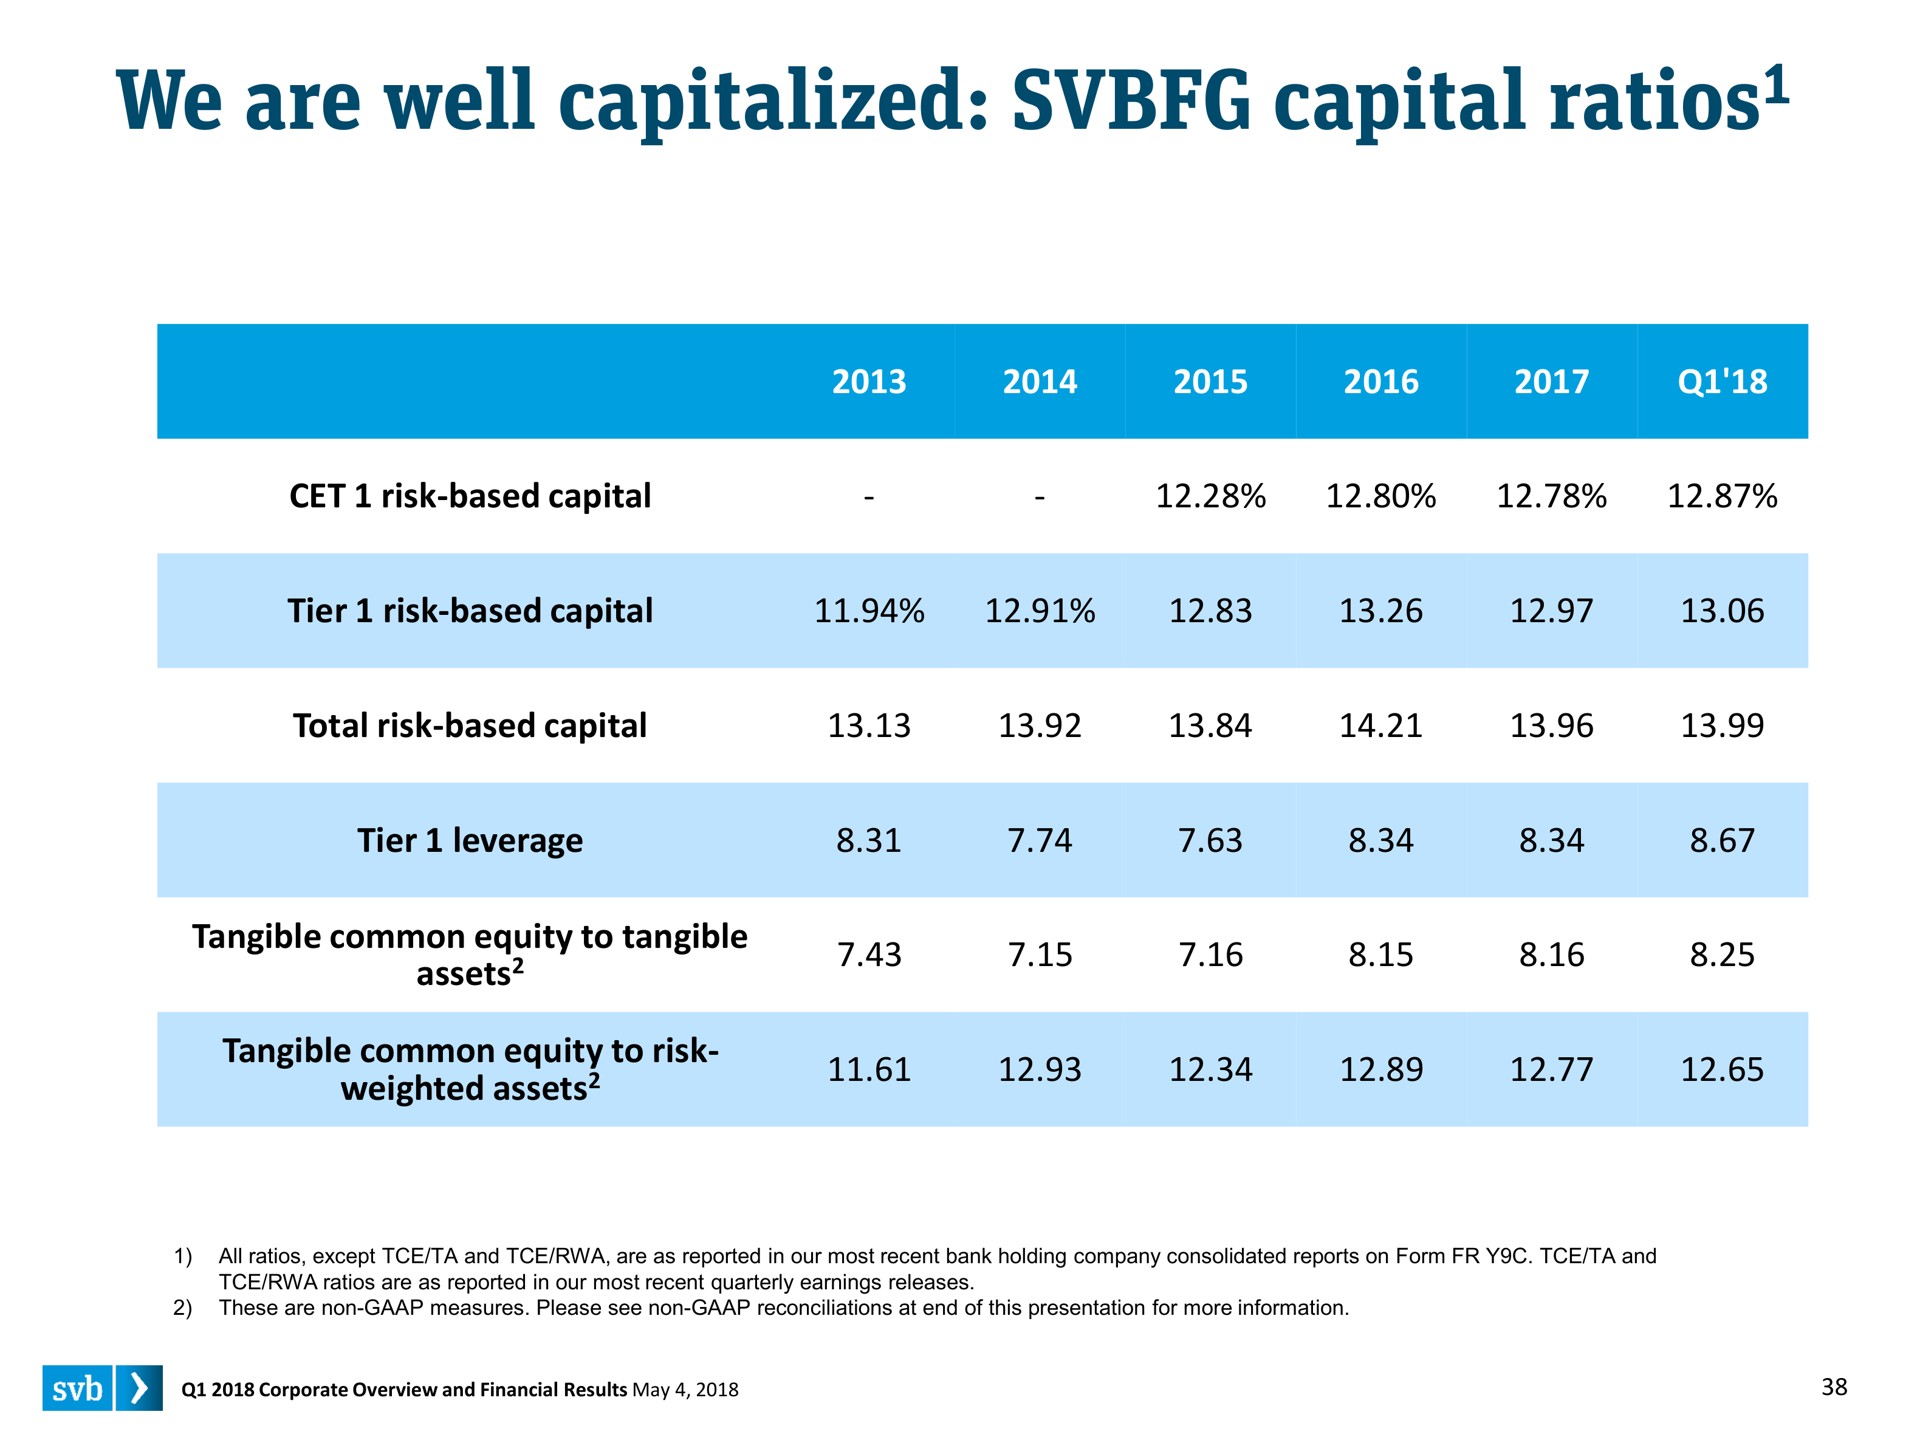 we are well capitalized capital ratios ratios | Silicon Valley Bank